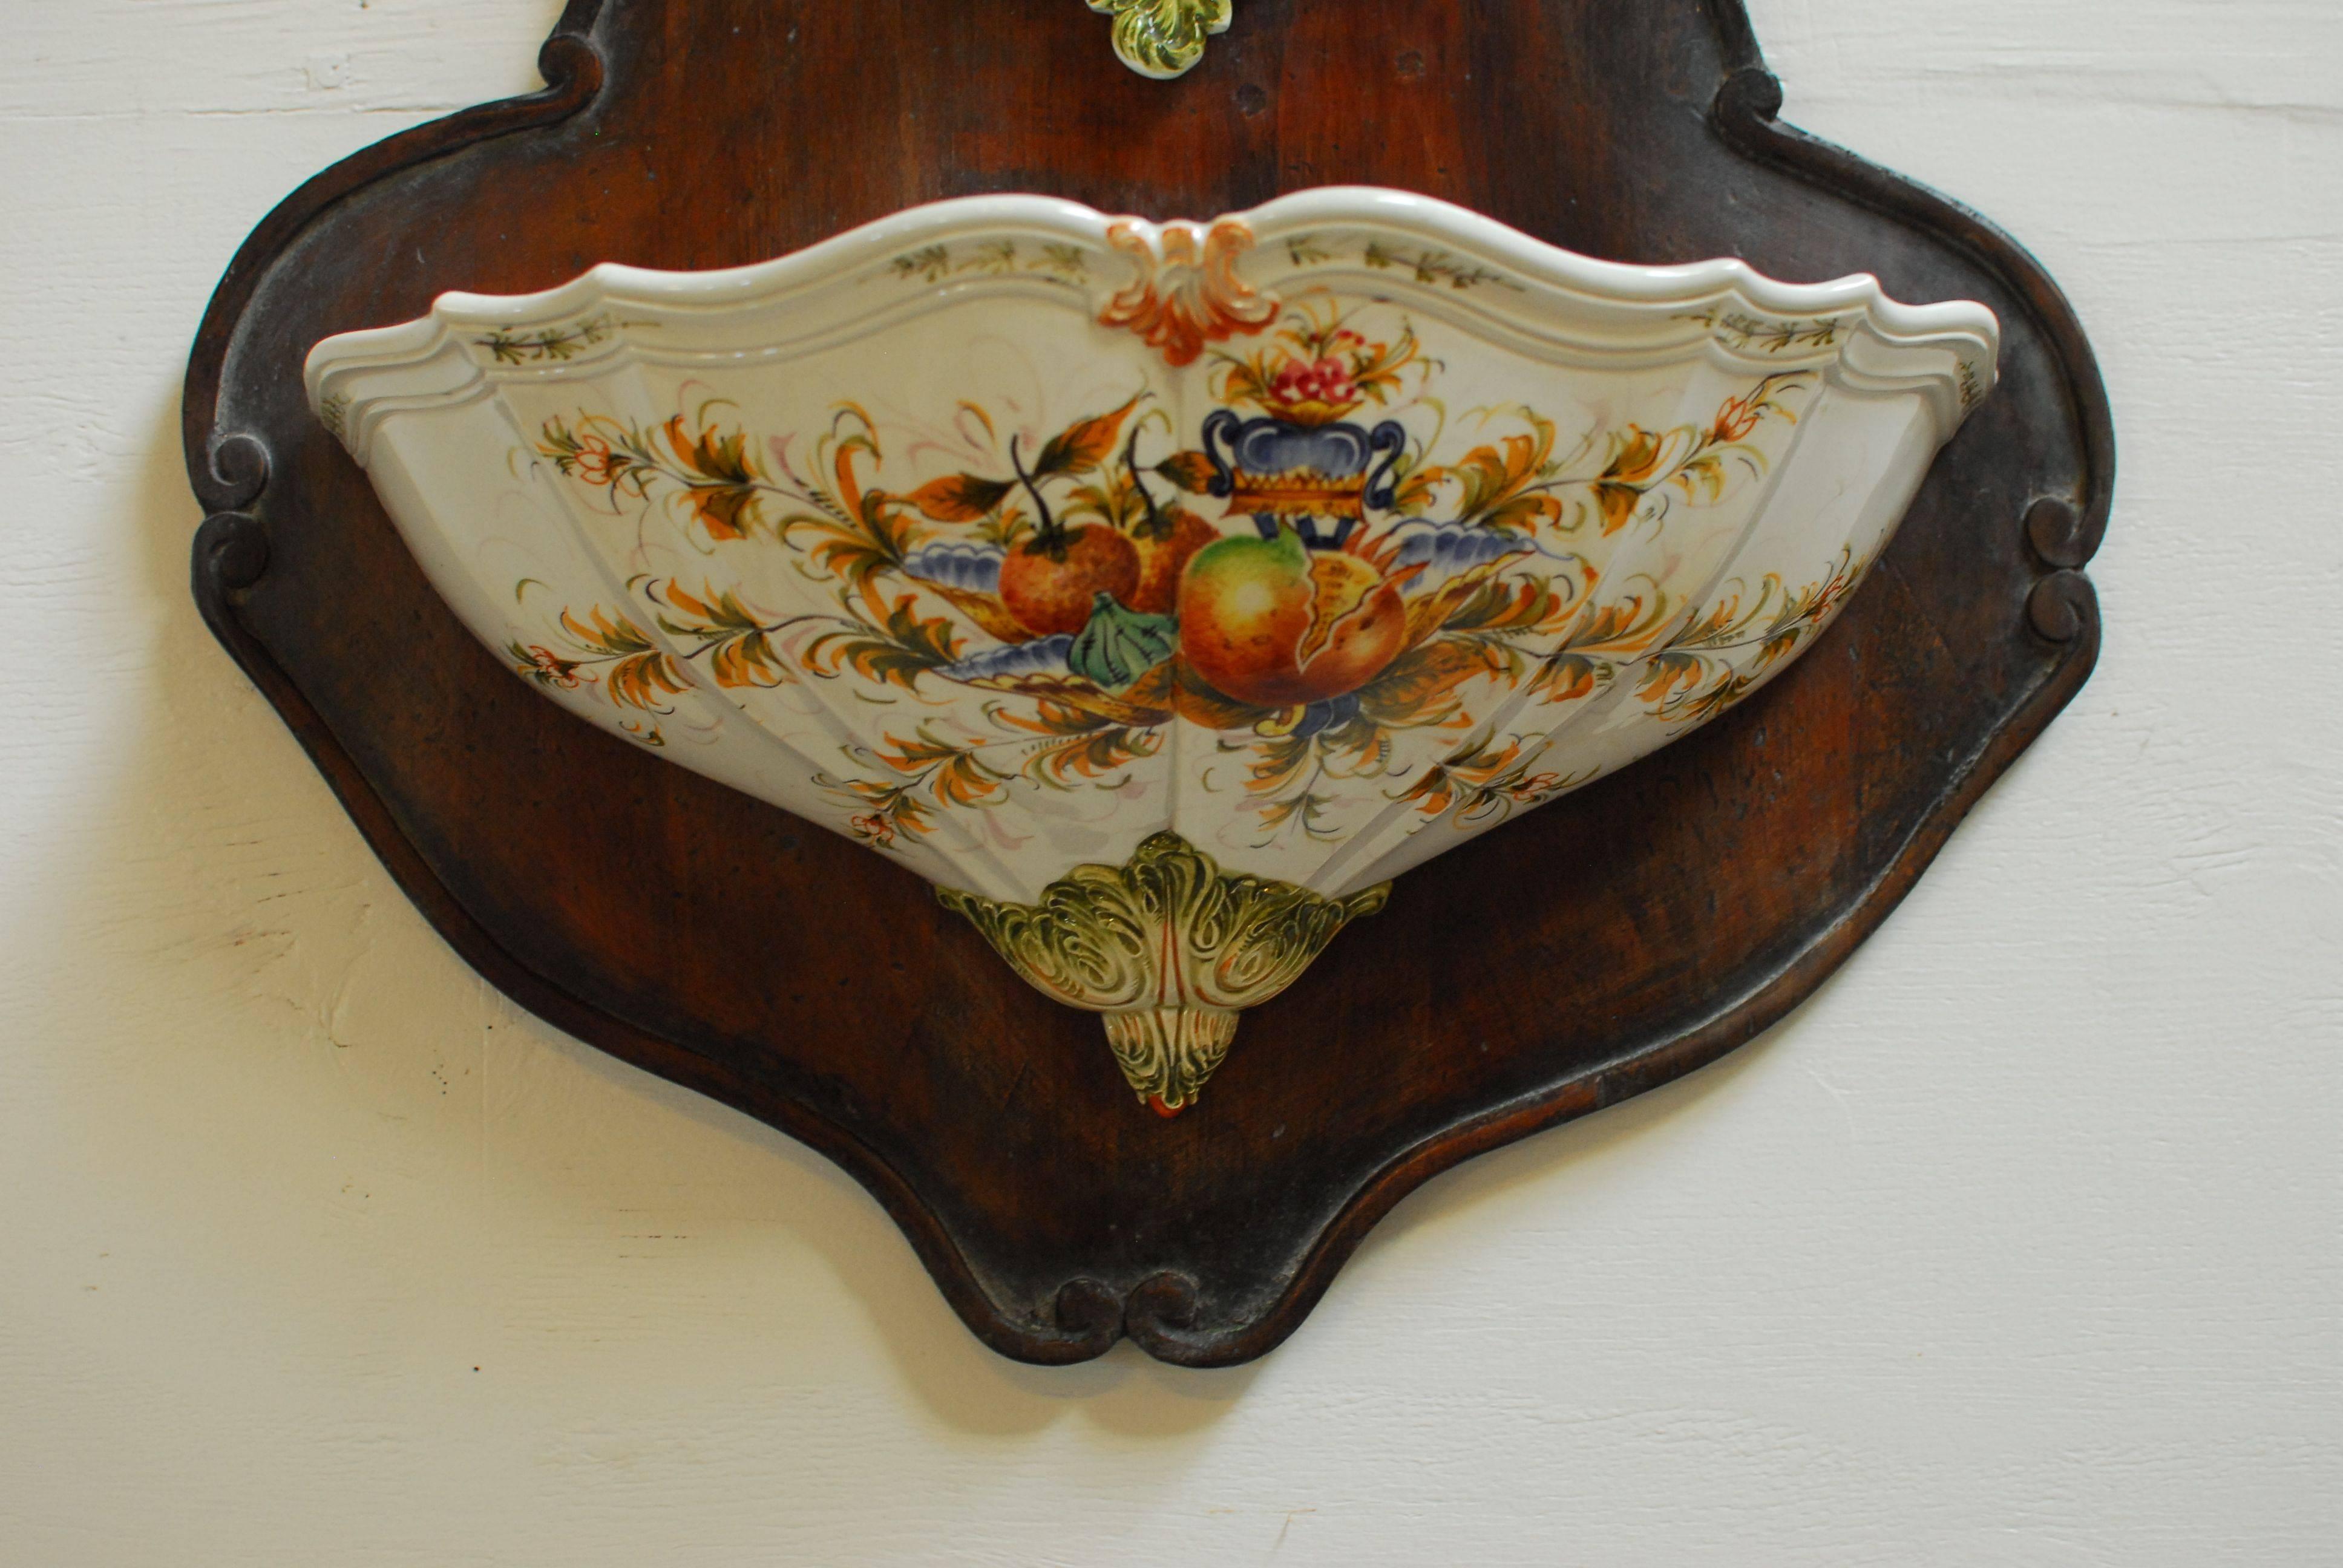 Rococo style Italian porcelain three piece lavabo hanging wall fountain mounted to a carved shaped base with a decorative edge. Top cistern has brass metal spigot and both pieces feature vibrant hand painted scenes with fruits, flowers, and bright